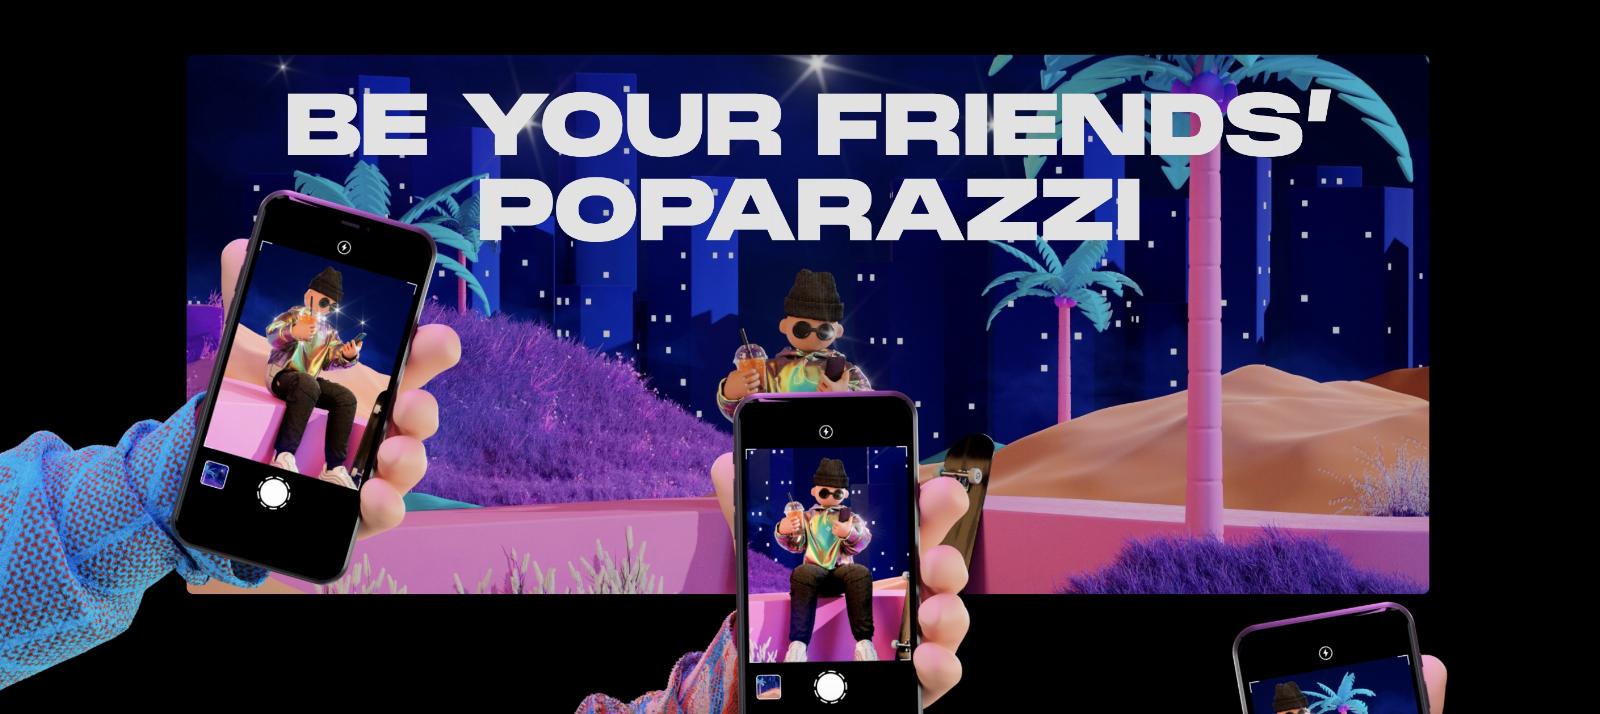 Once-hot photo-sharing app Poparazzi is shutting down